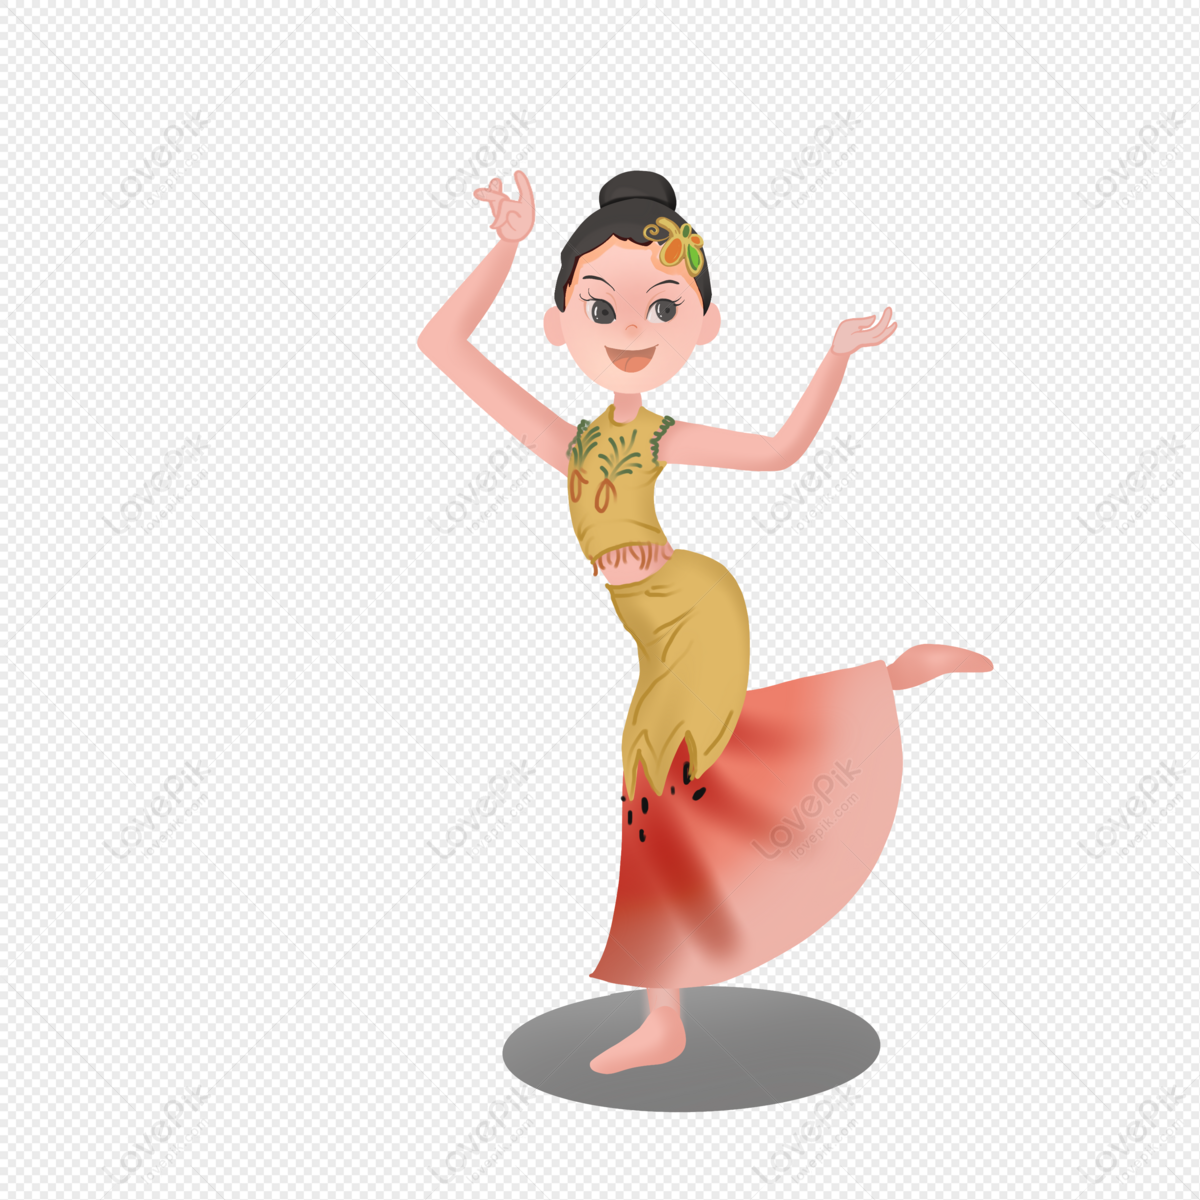 Dancing Children PNG Hd Transparent Image And Clipart Image For Free  Download - Lovepik | 401434134